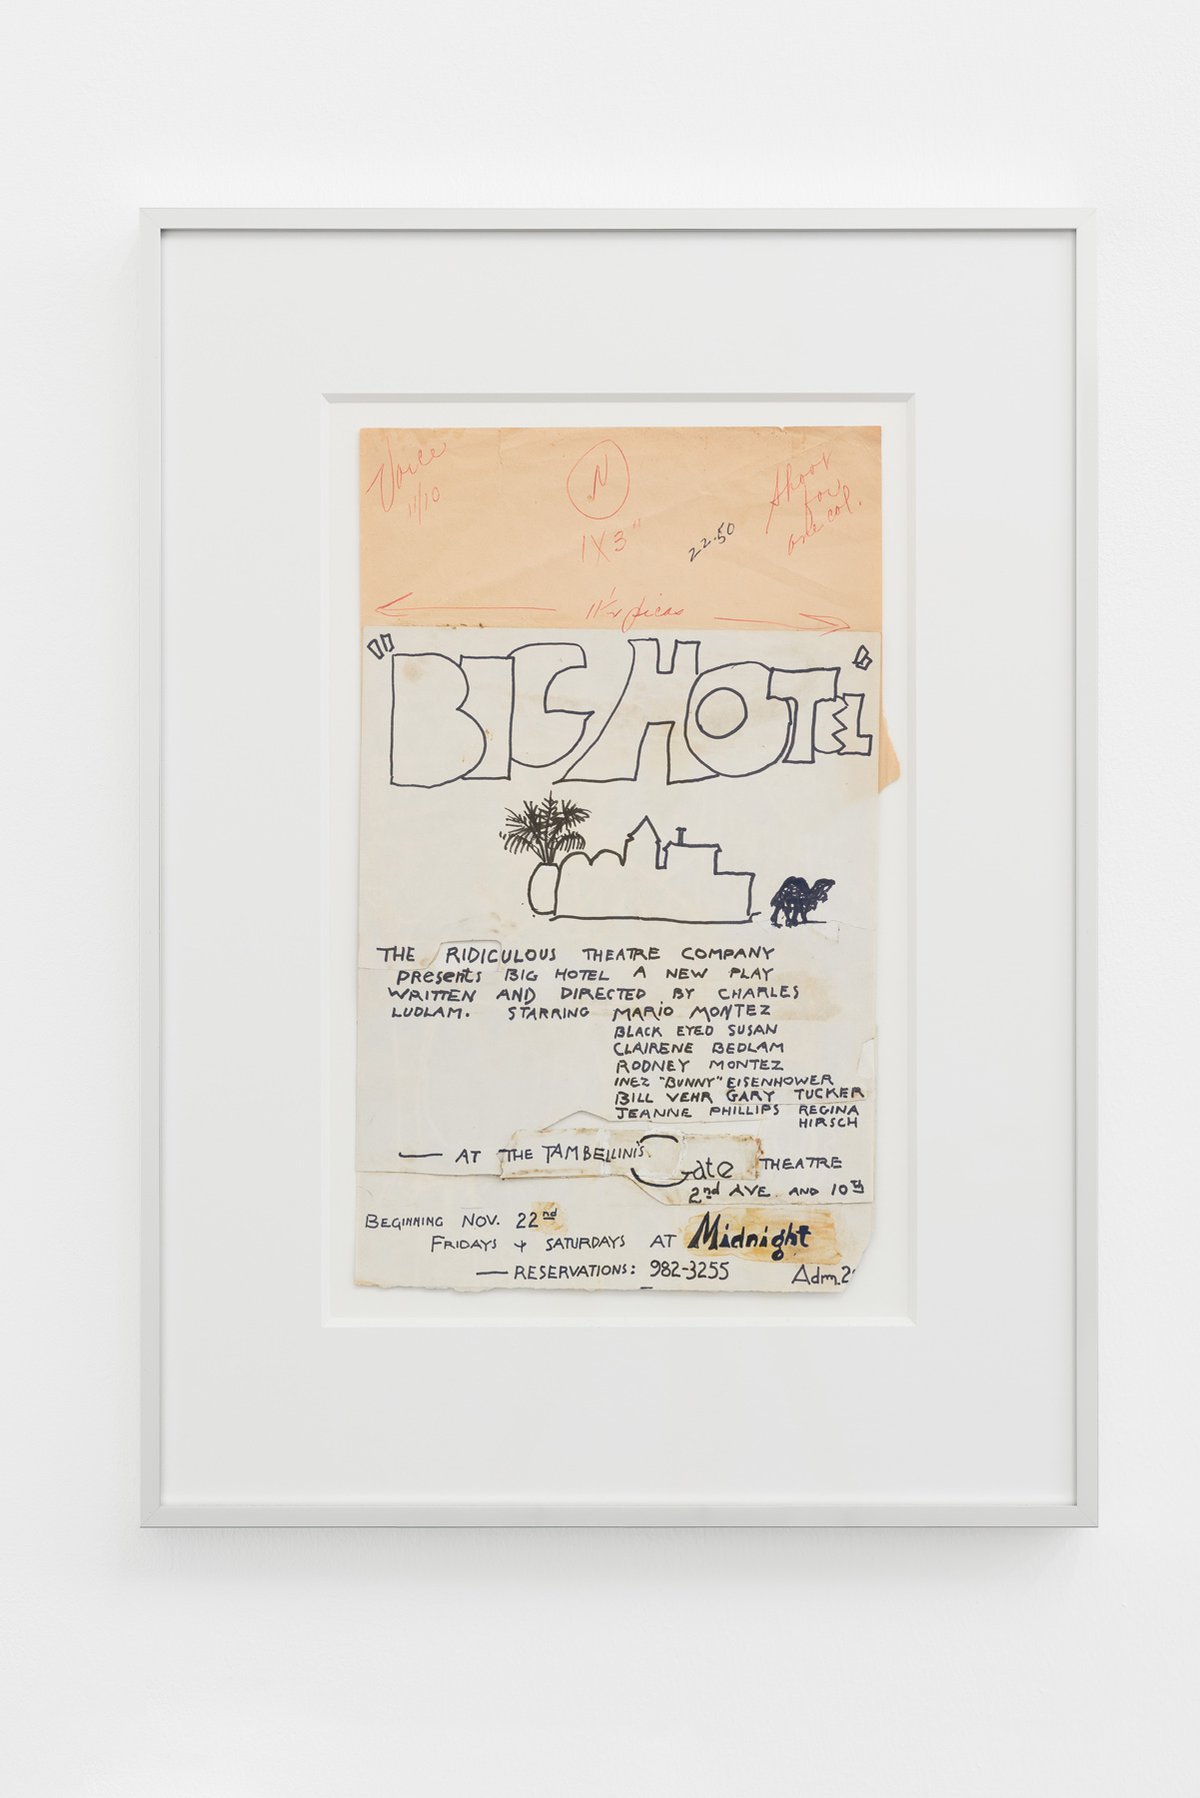 Jack SmithPoster Big Hotel, 1968Private collection